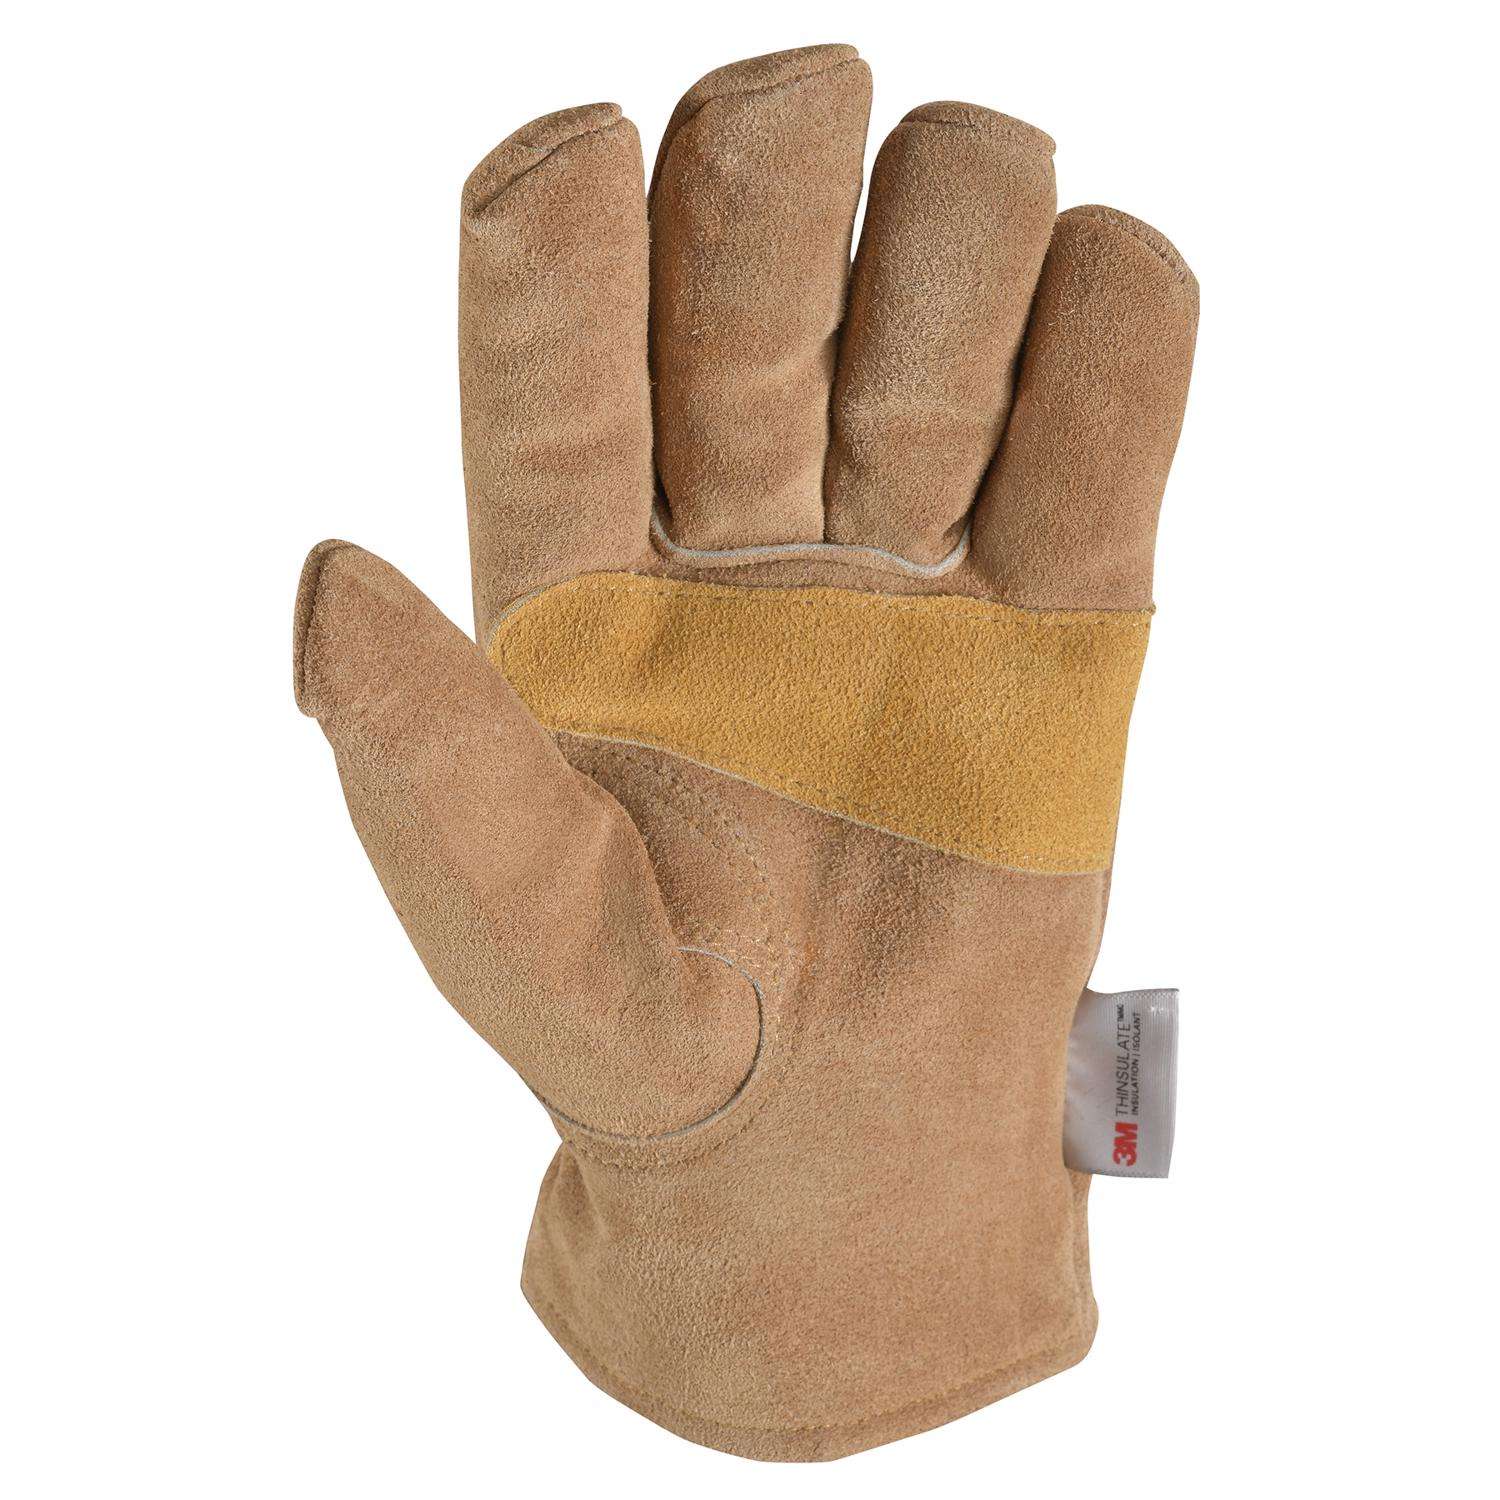 Wells Lamont Thinsulate Lined Leather Cowhide Work Gloves XL